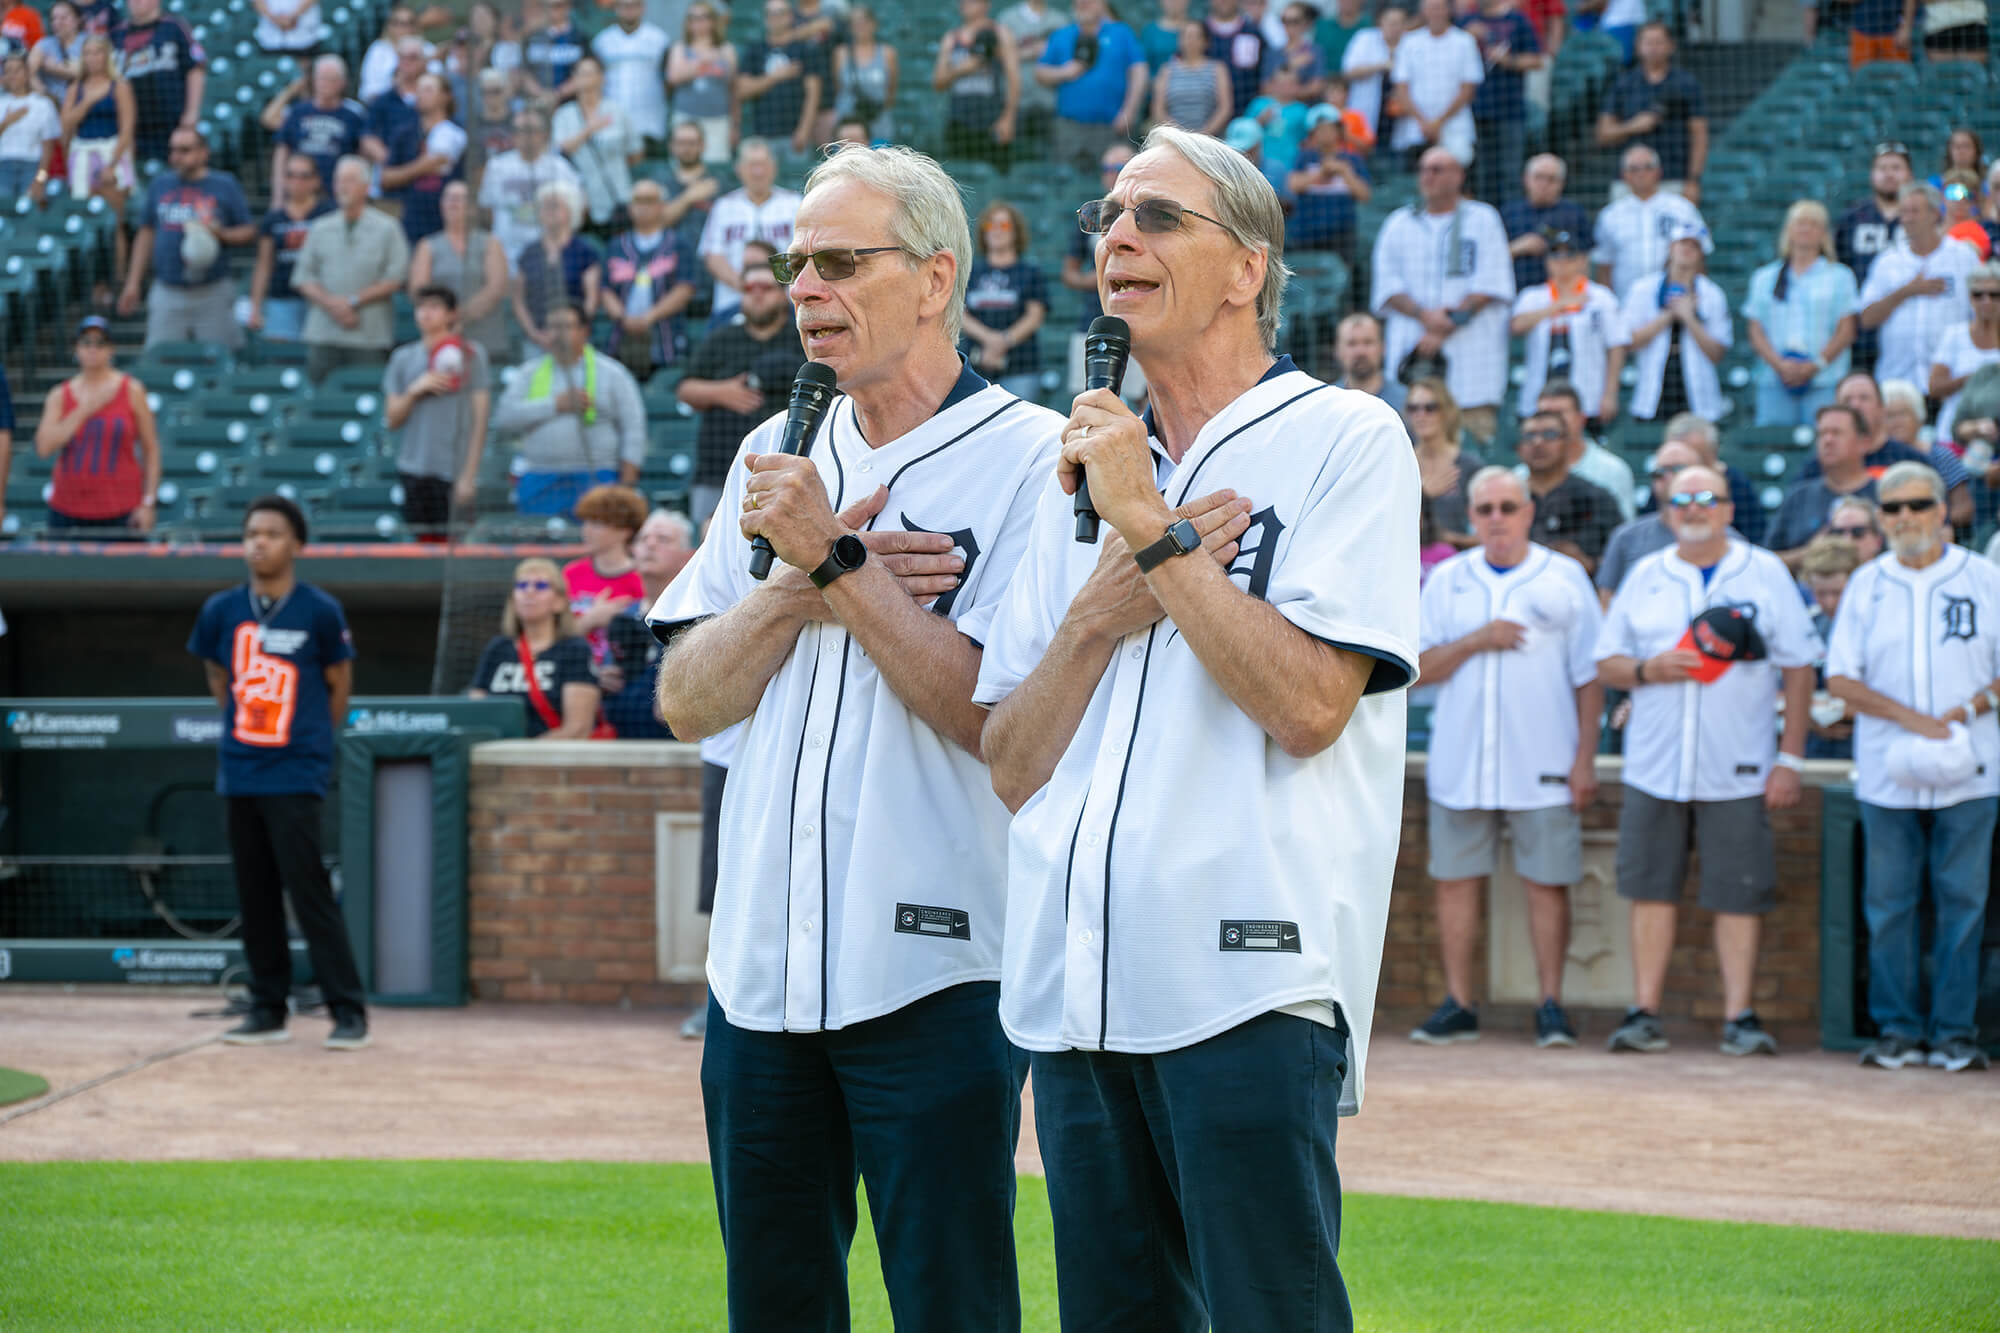 Bruce and Brian Ake sing the National Anthem to kick off the Prostate Cancer Awareness Night Game with the Detroit Tigers.